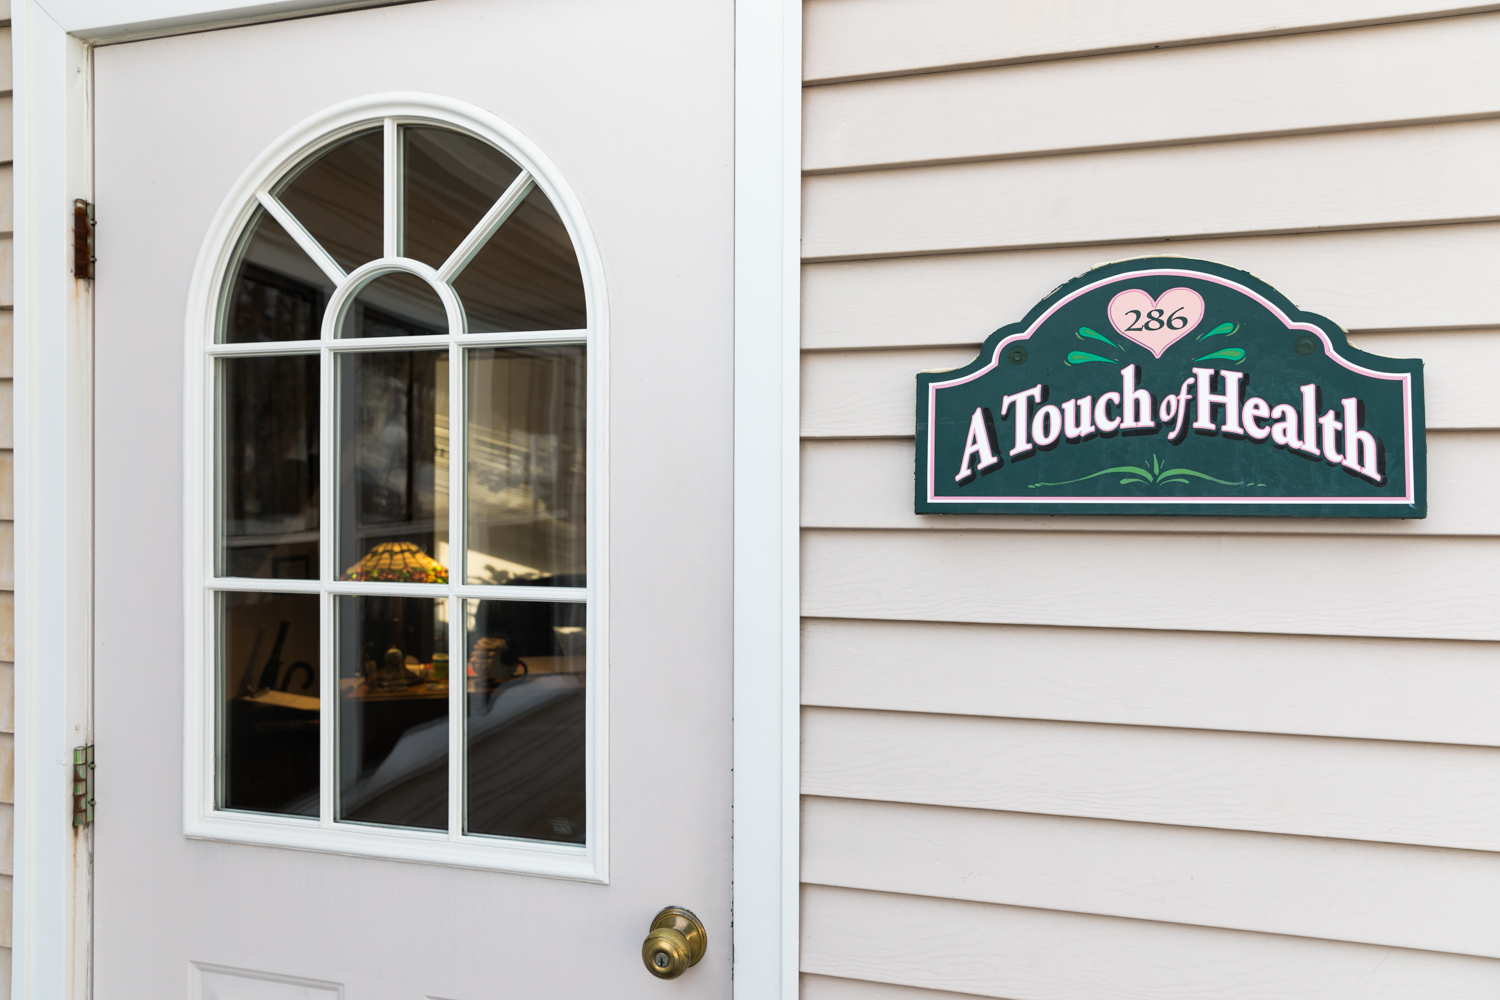 A Touch of Health 286 Main St, Winthrop Maine 04364